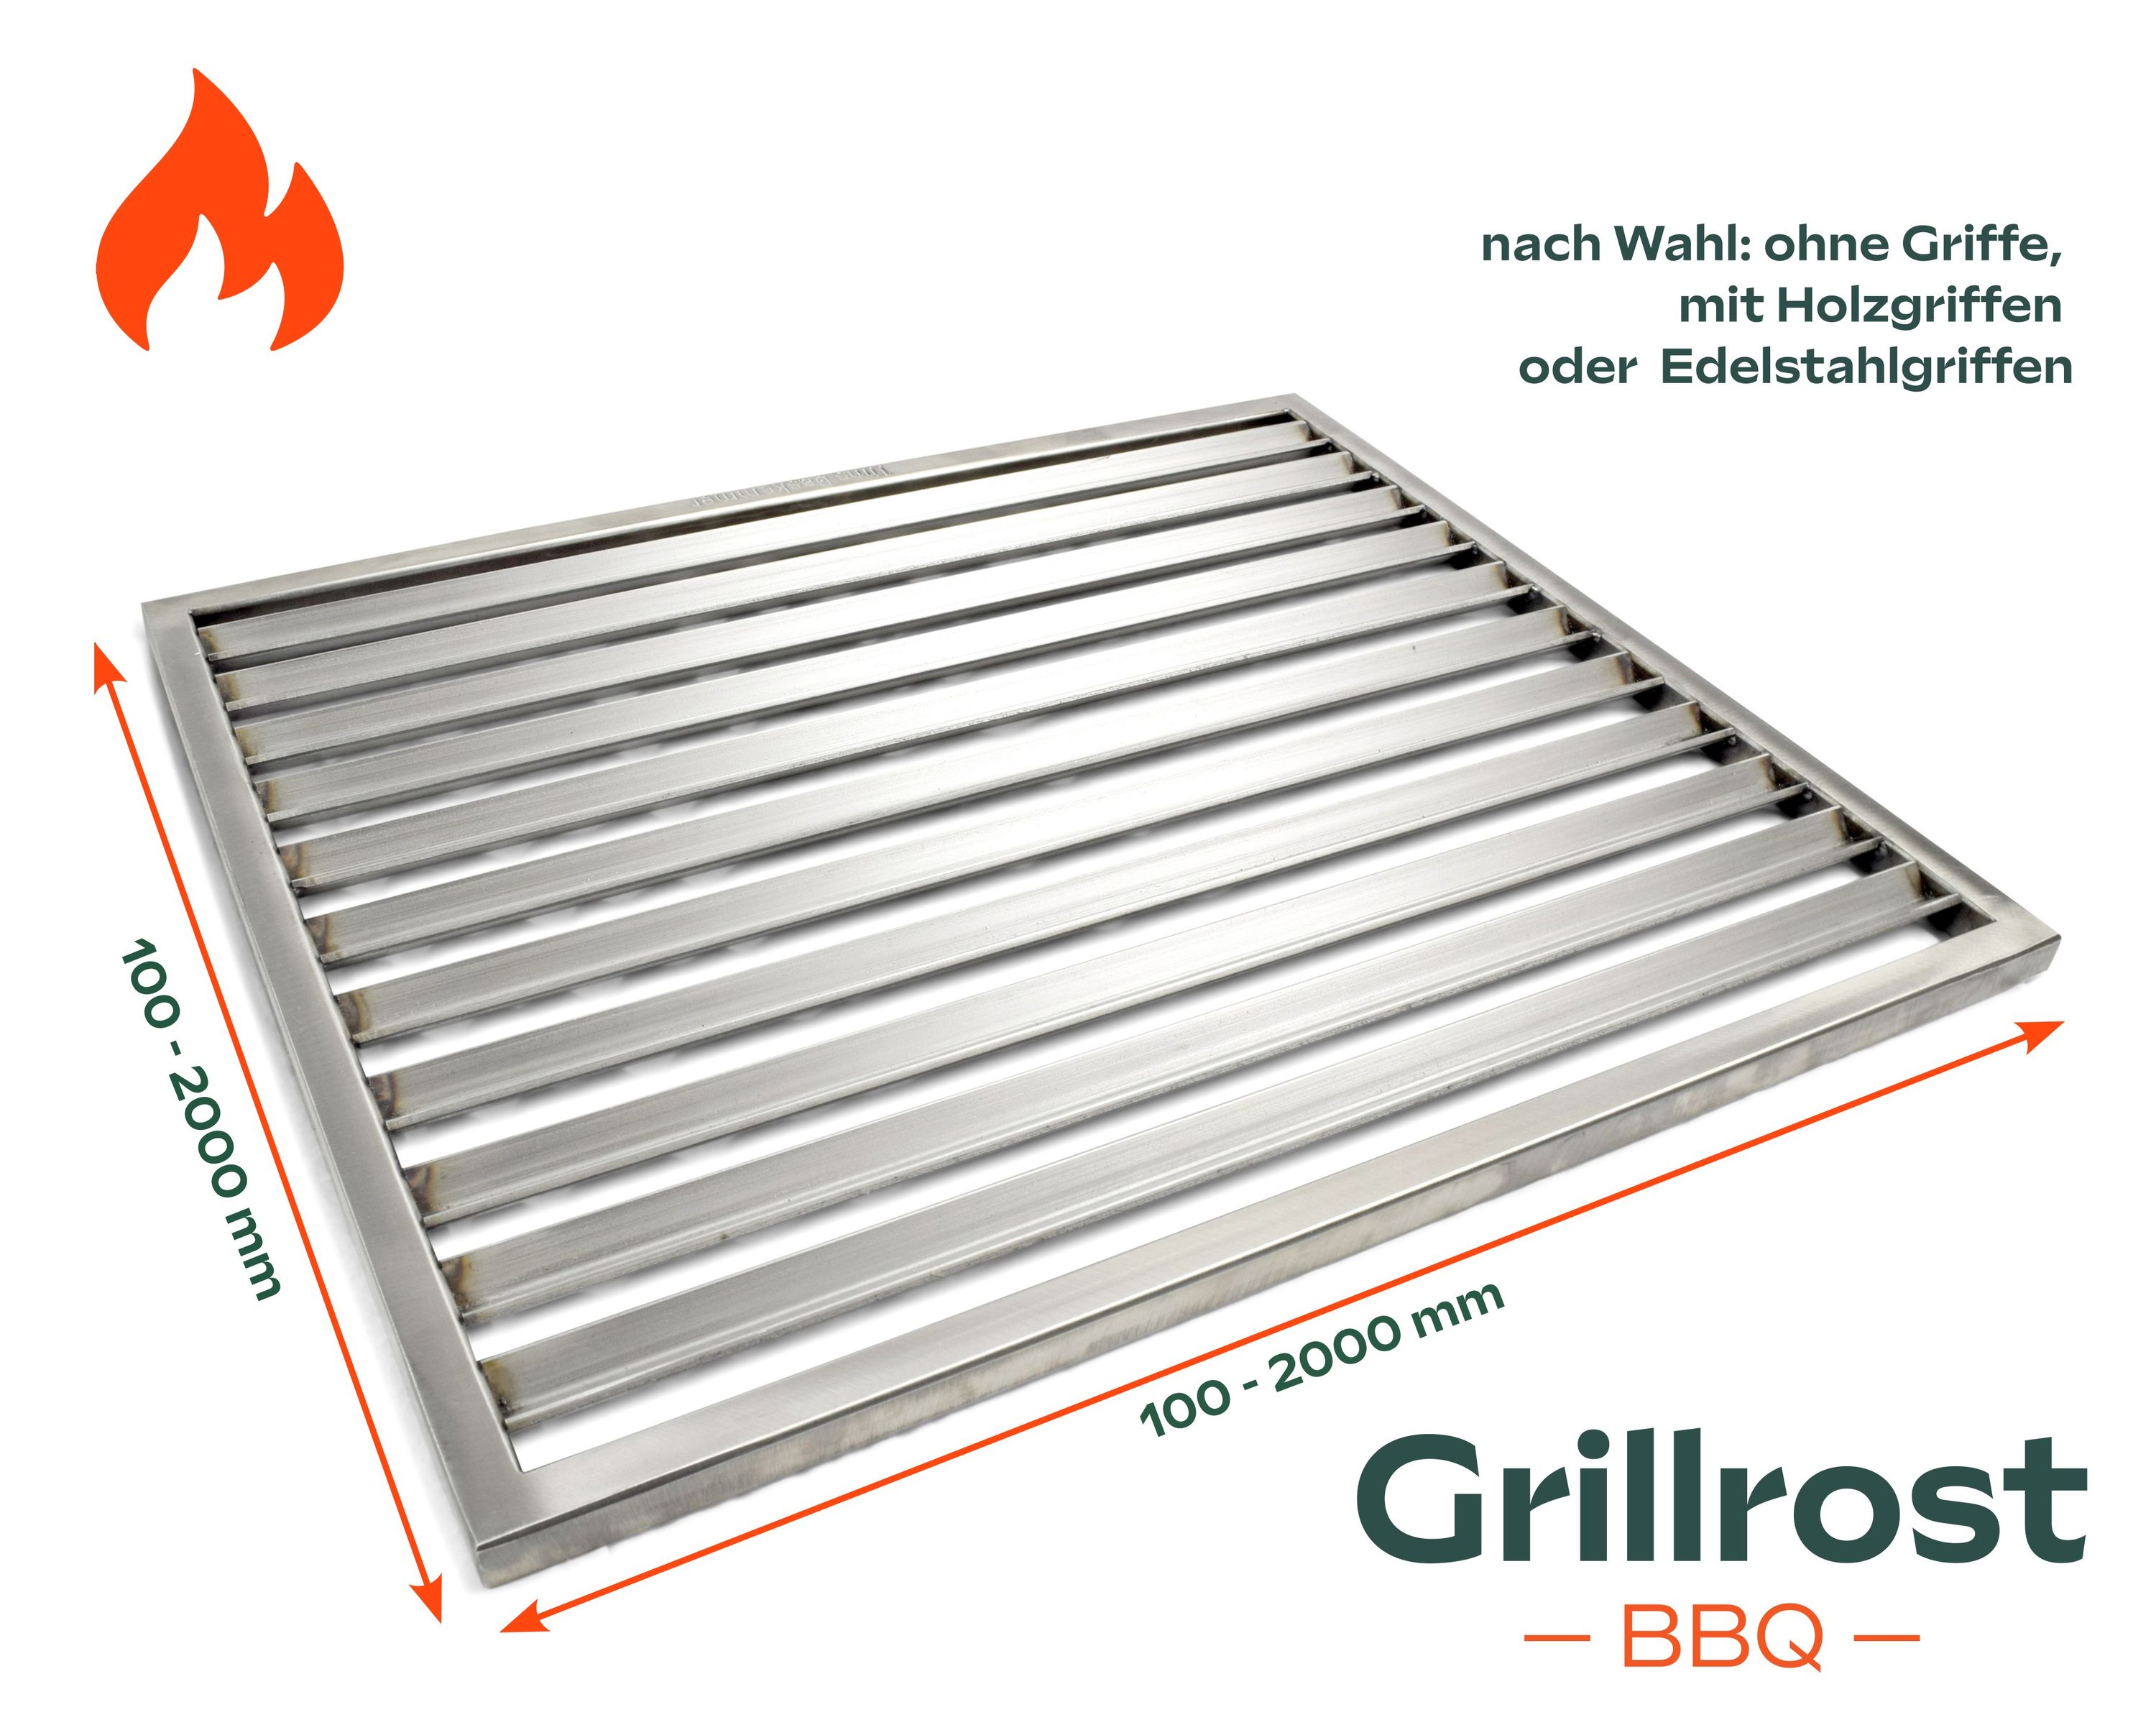 Barbecue grill made to measure ECKIG Model SOLID in stainless steel